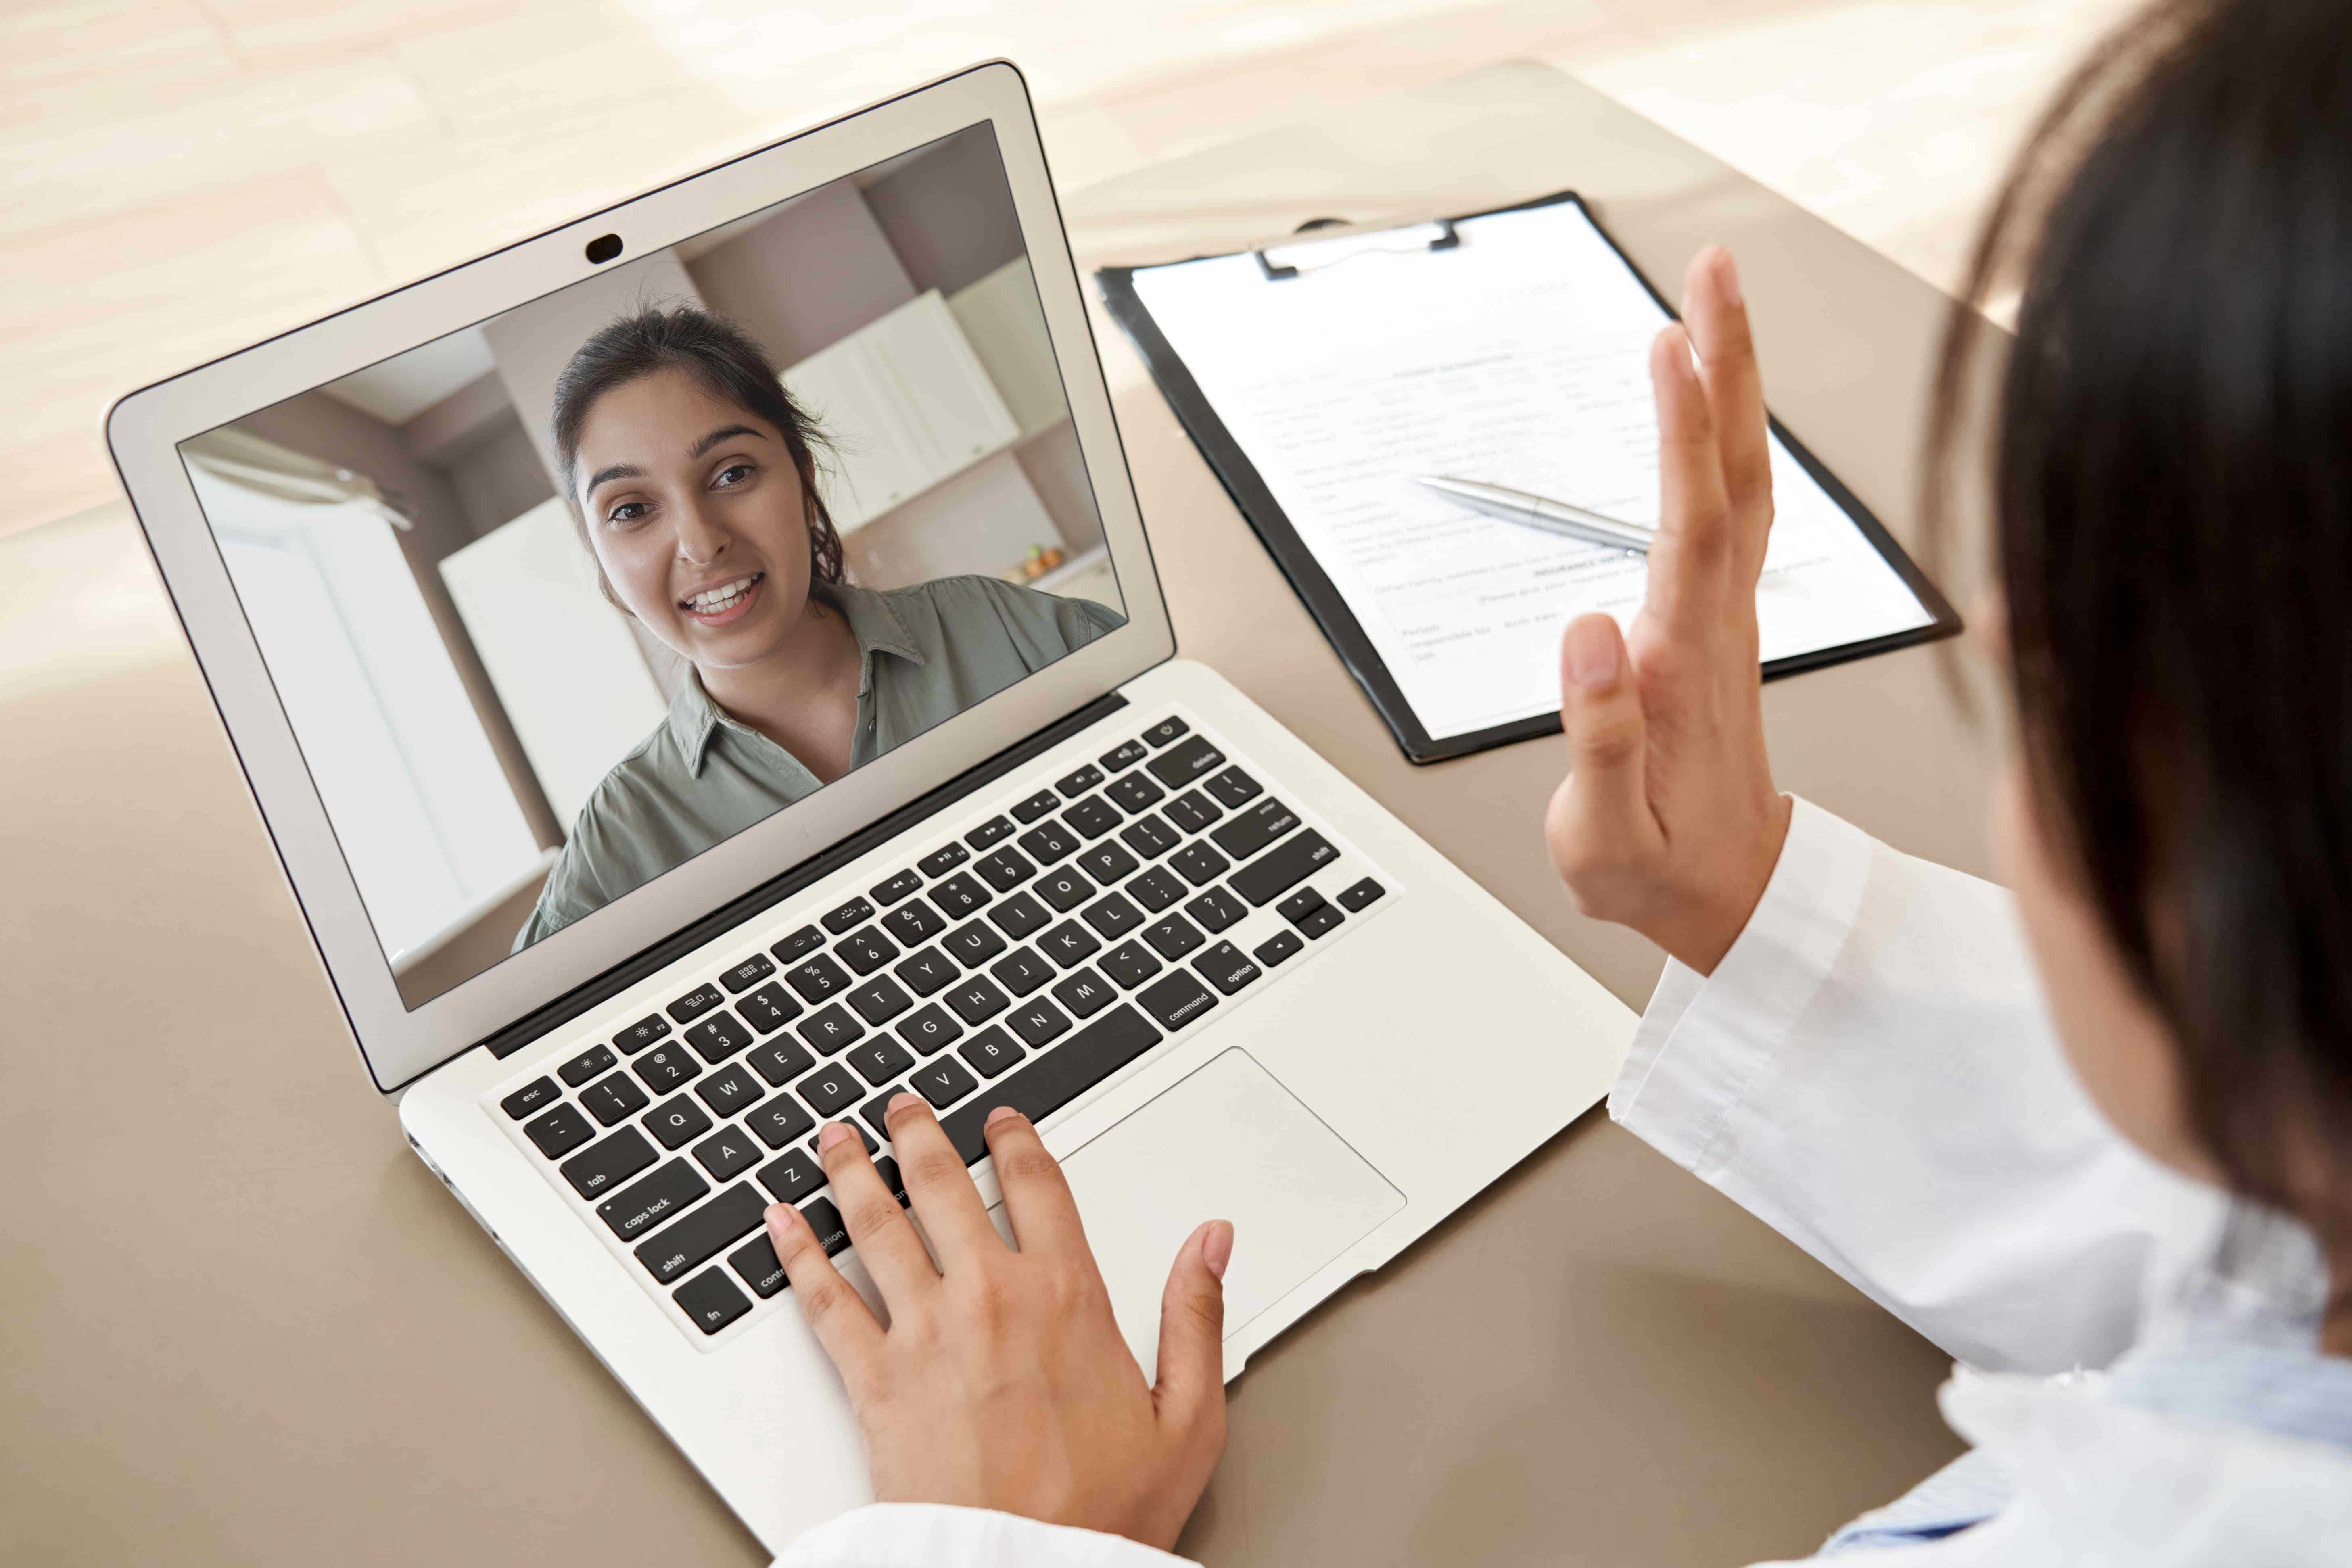 Doctors provide free telehealth services to COVID-19 patients in India